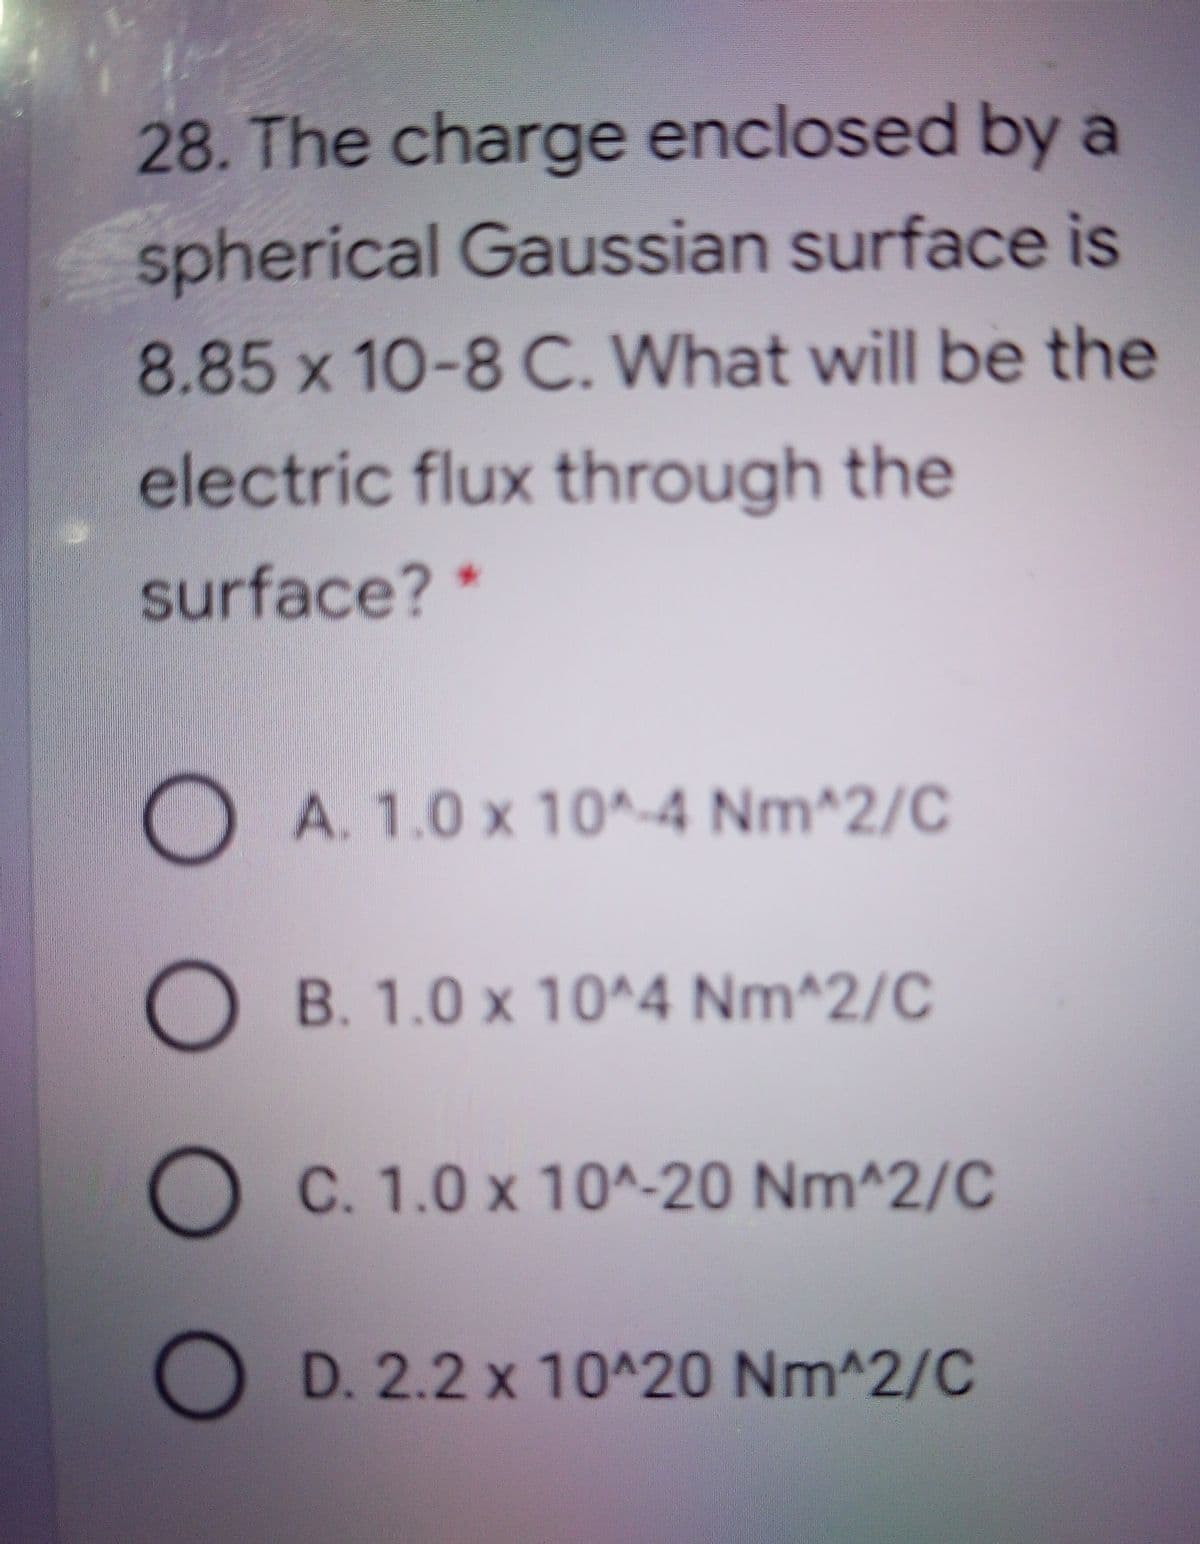 28. The charge enclosed by a
spherical Gaussian surface is
8.85 x 10-8 C. What will be the
electric flux through the
surface? *
O A. 1.0 x 10^-4 Nm^2/C
B. 1.0 x 10^4 Nm^2/C
C. 1.0 x 10^-20 Nm^2/C
D. 2.2 x 10^20 Nm^2/C
